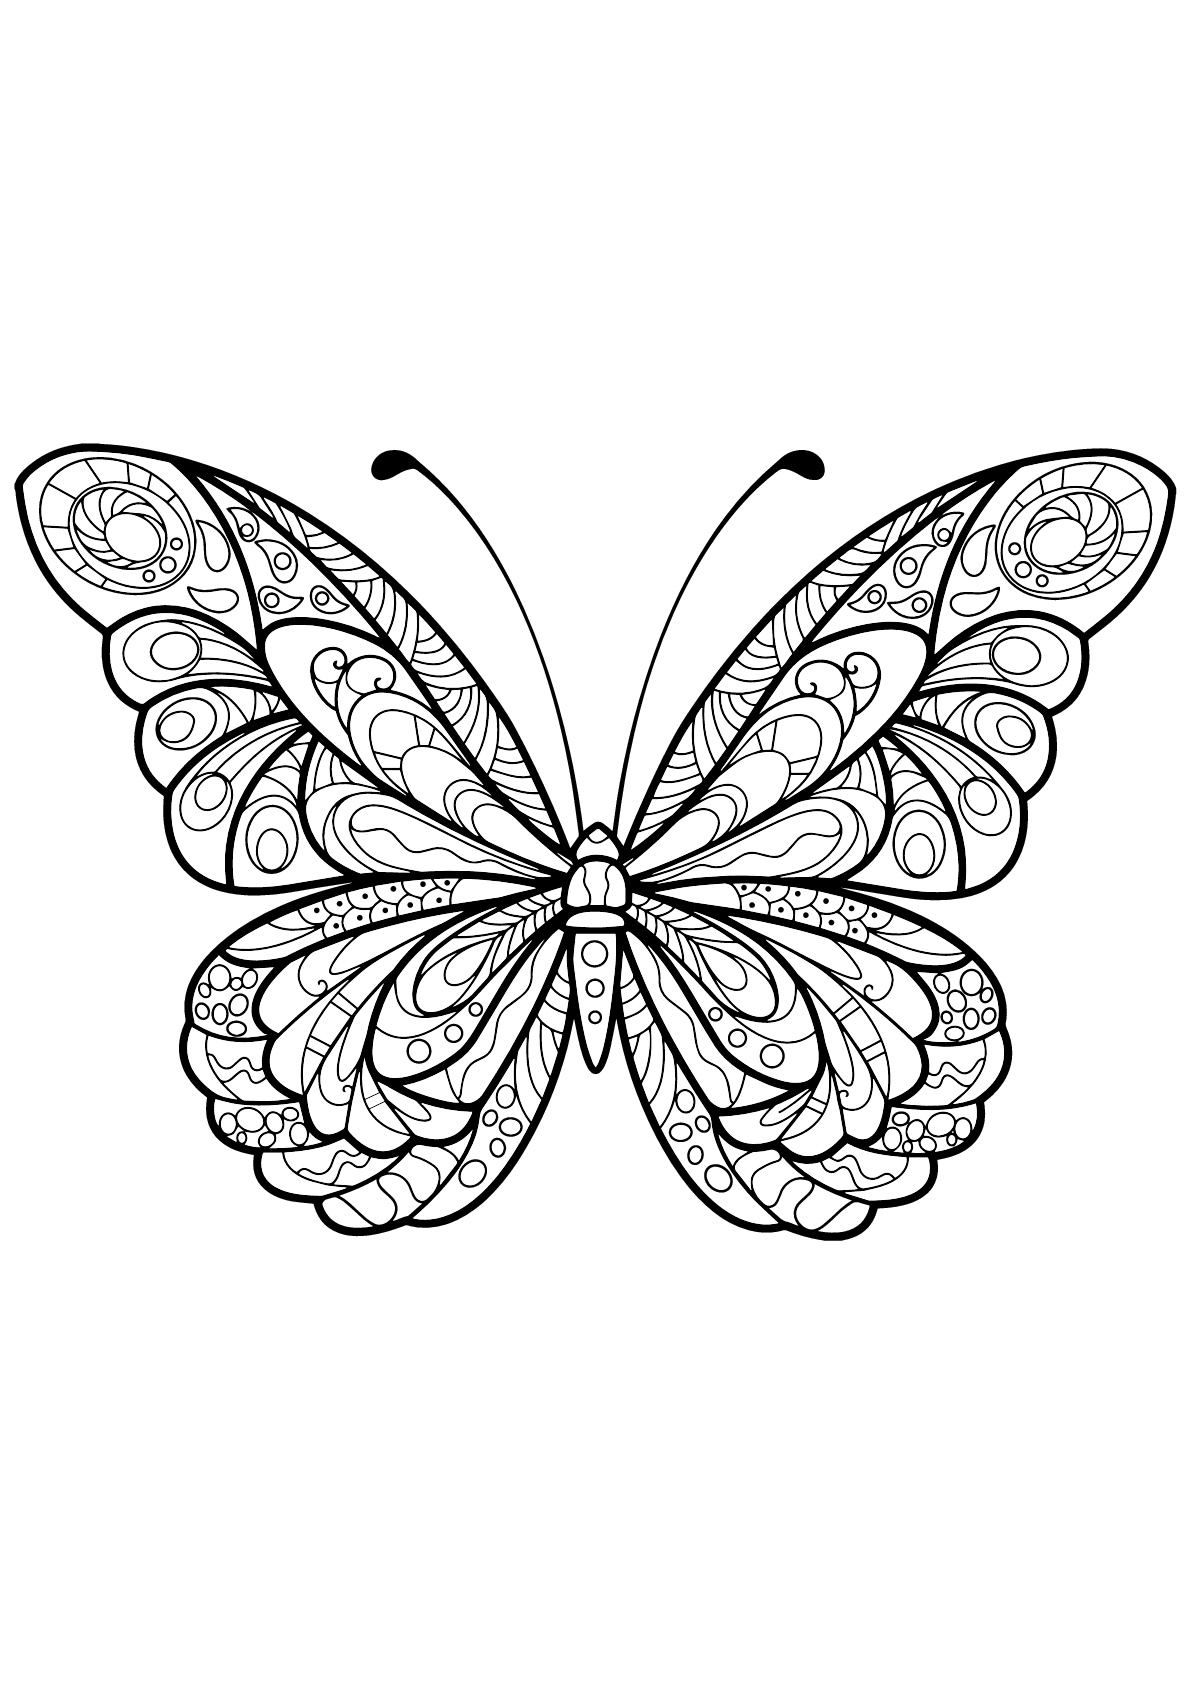 Butterfly beautiful patterns 5 - Butterflies & insects Adult Coloring Pages